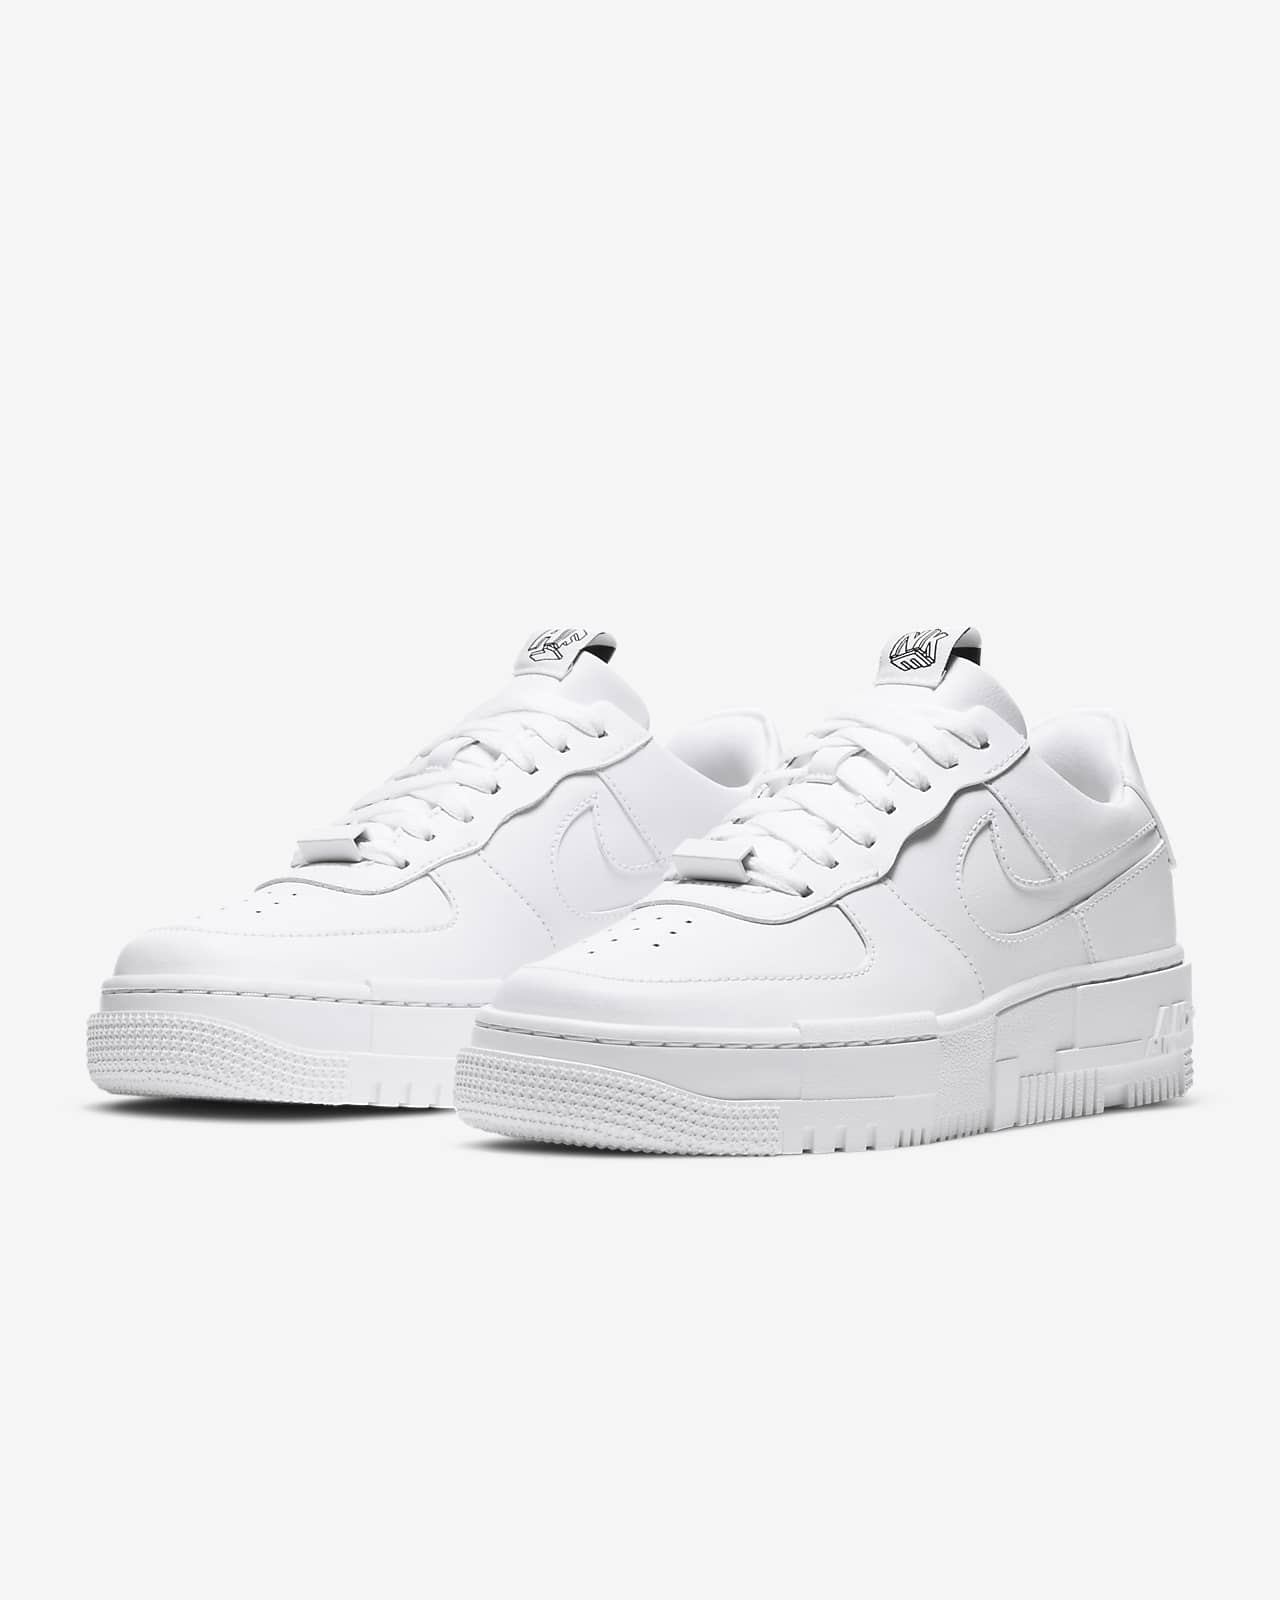 Chaussure Nike Air Force 1 Pixel pour Femme. Nike FR